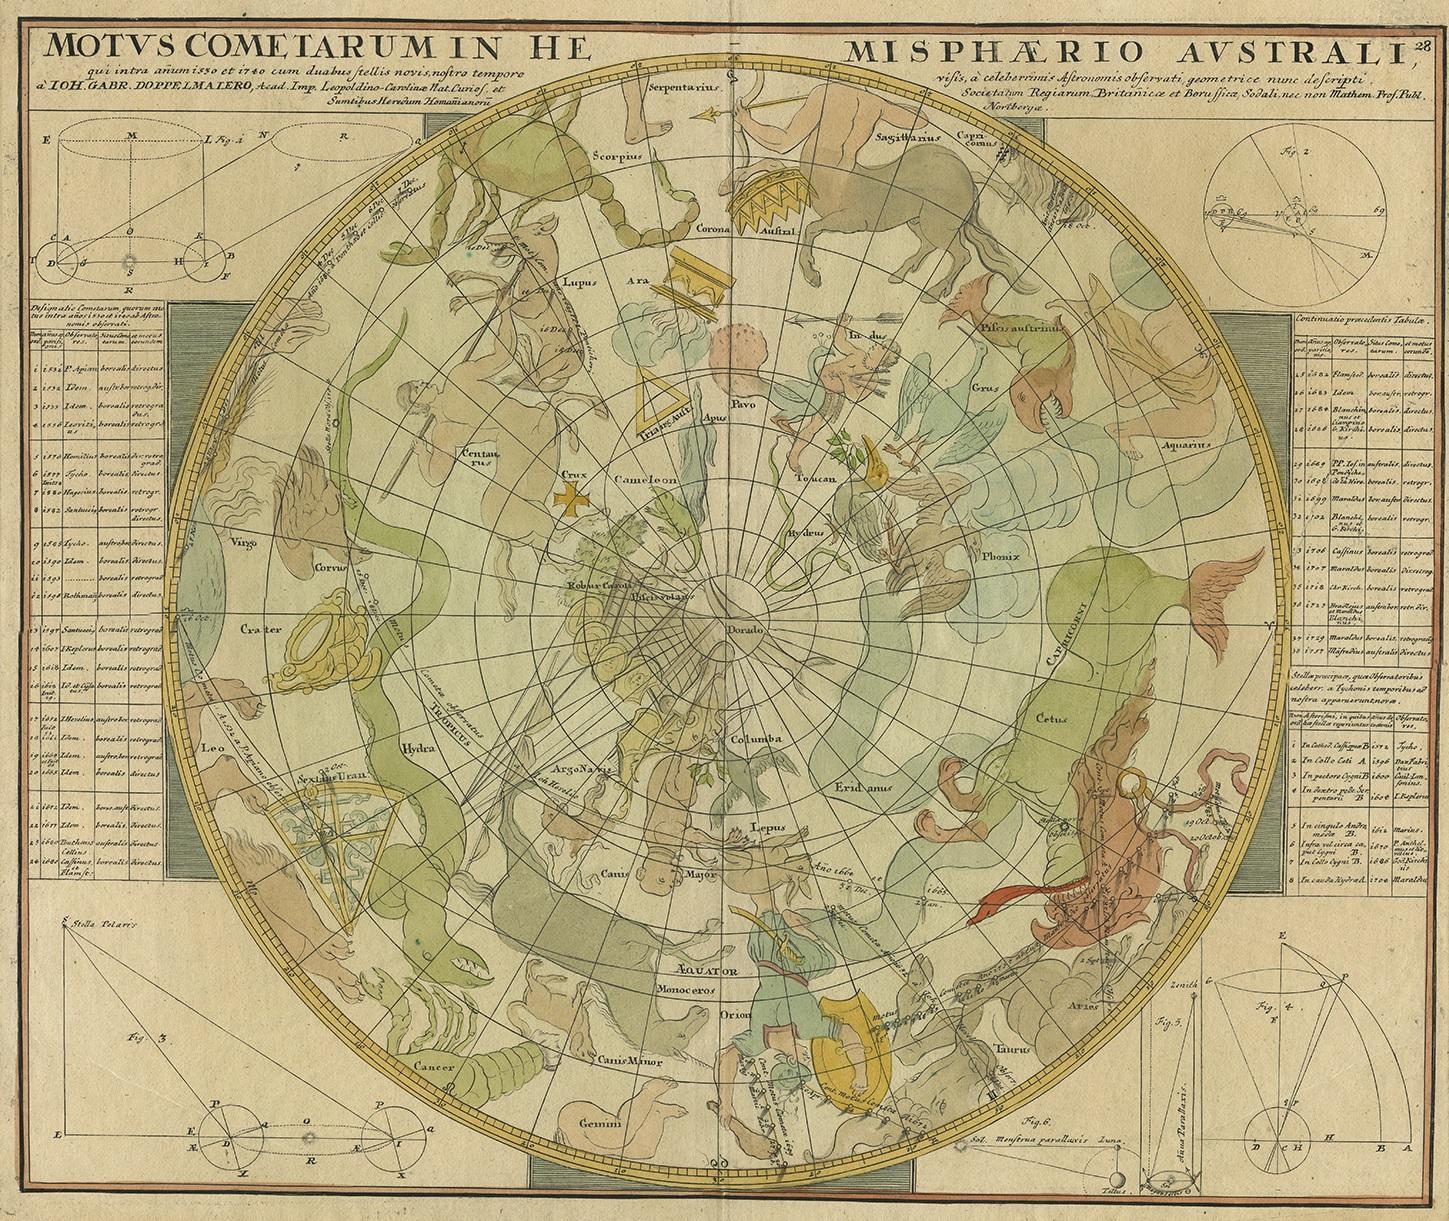 Antique map titled 'Motus Comtarum in Hemispaerio Australi (..)'. This uncommon chart depicts the passage of comets in the southern sky between the years 1530-1704. Centered on the ecliptic poles and shows the constellation figures based on